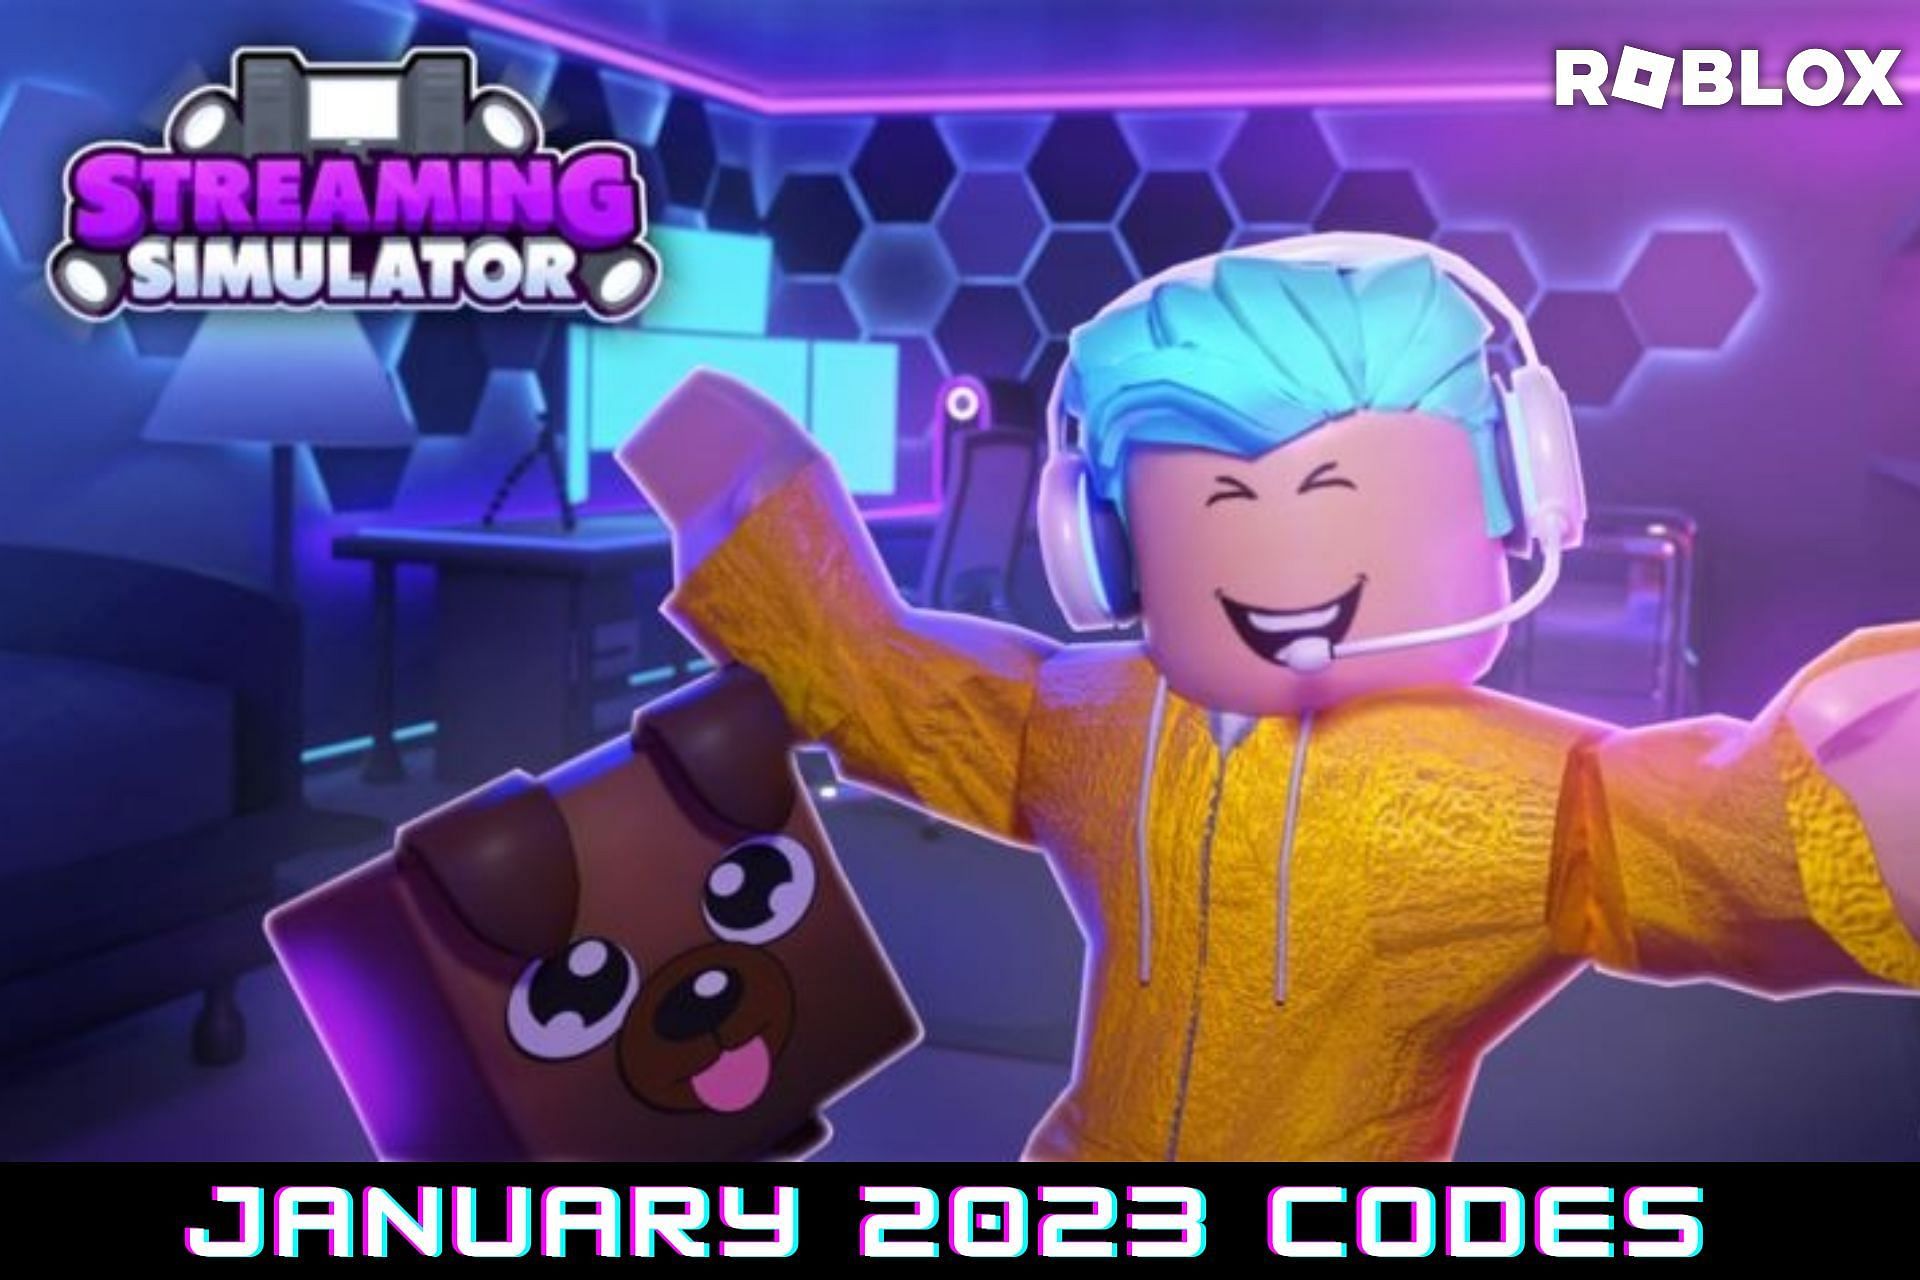 roblox-streaming-simulator-codes-for-january-2023-free-coins-and-pets